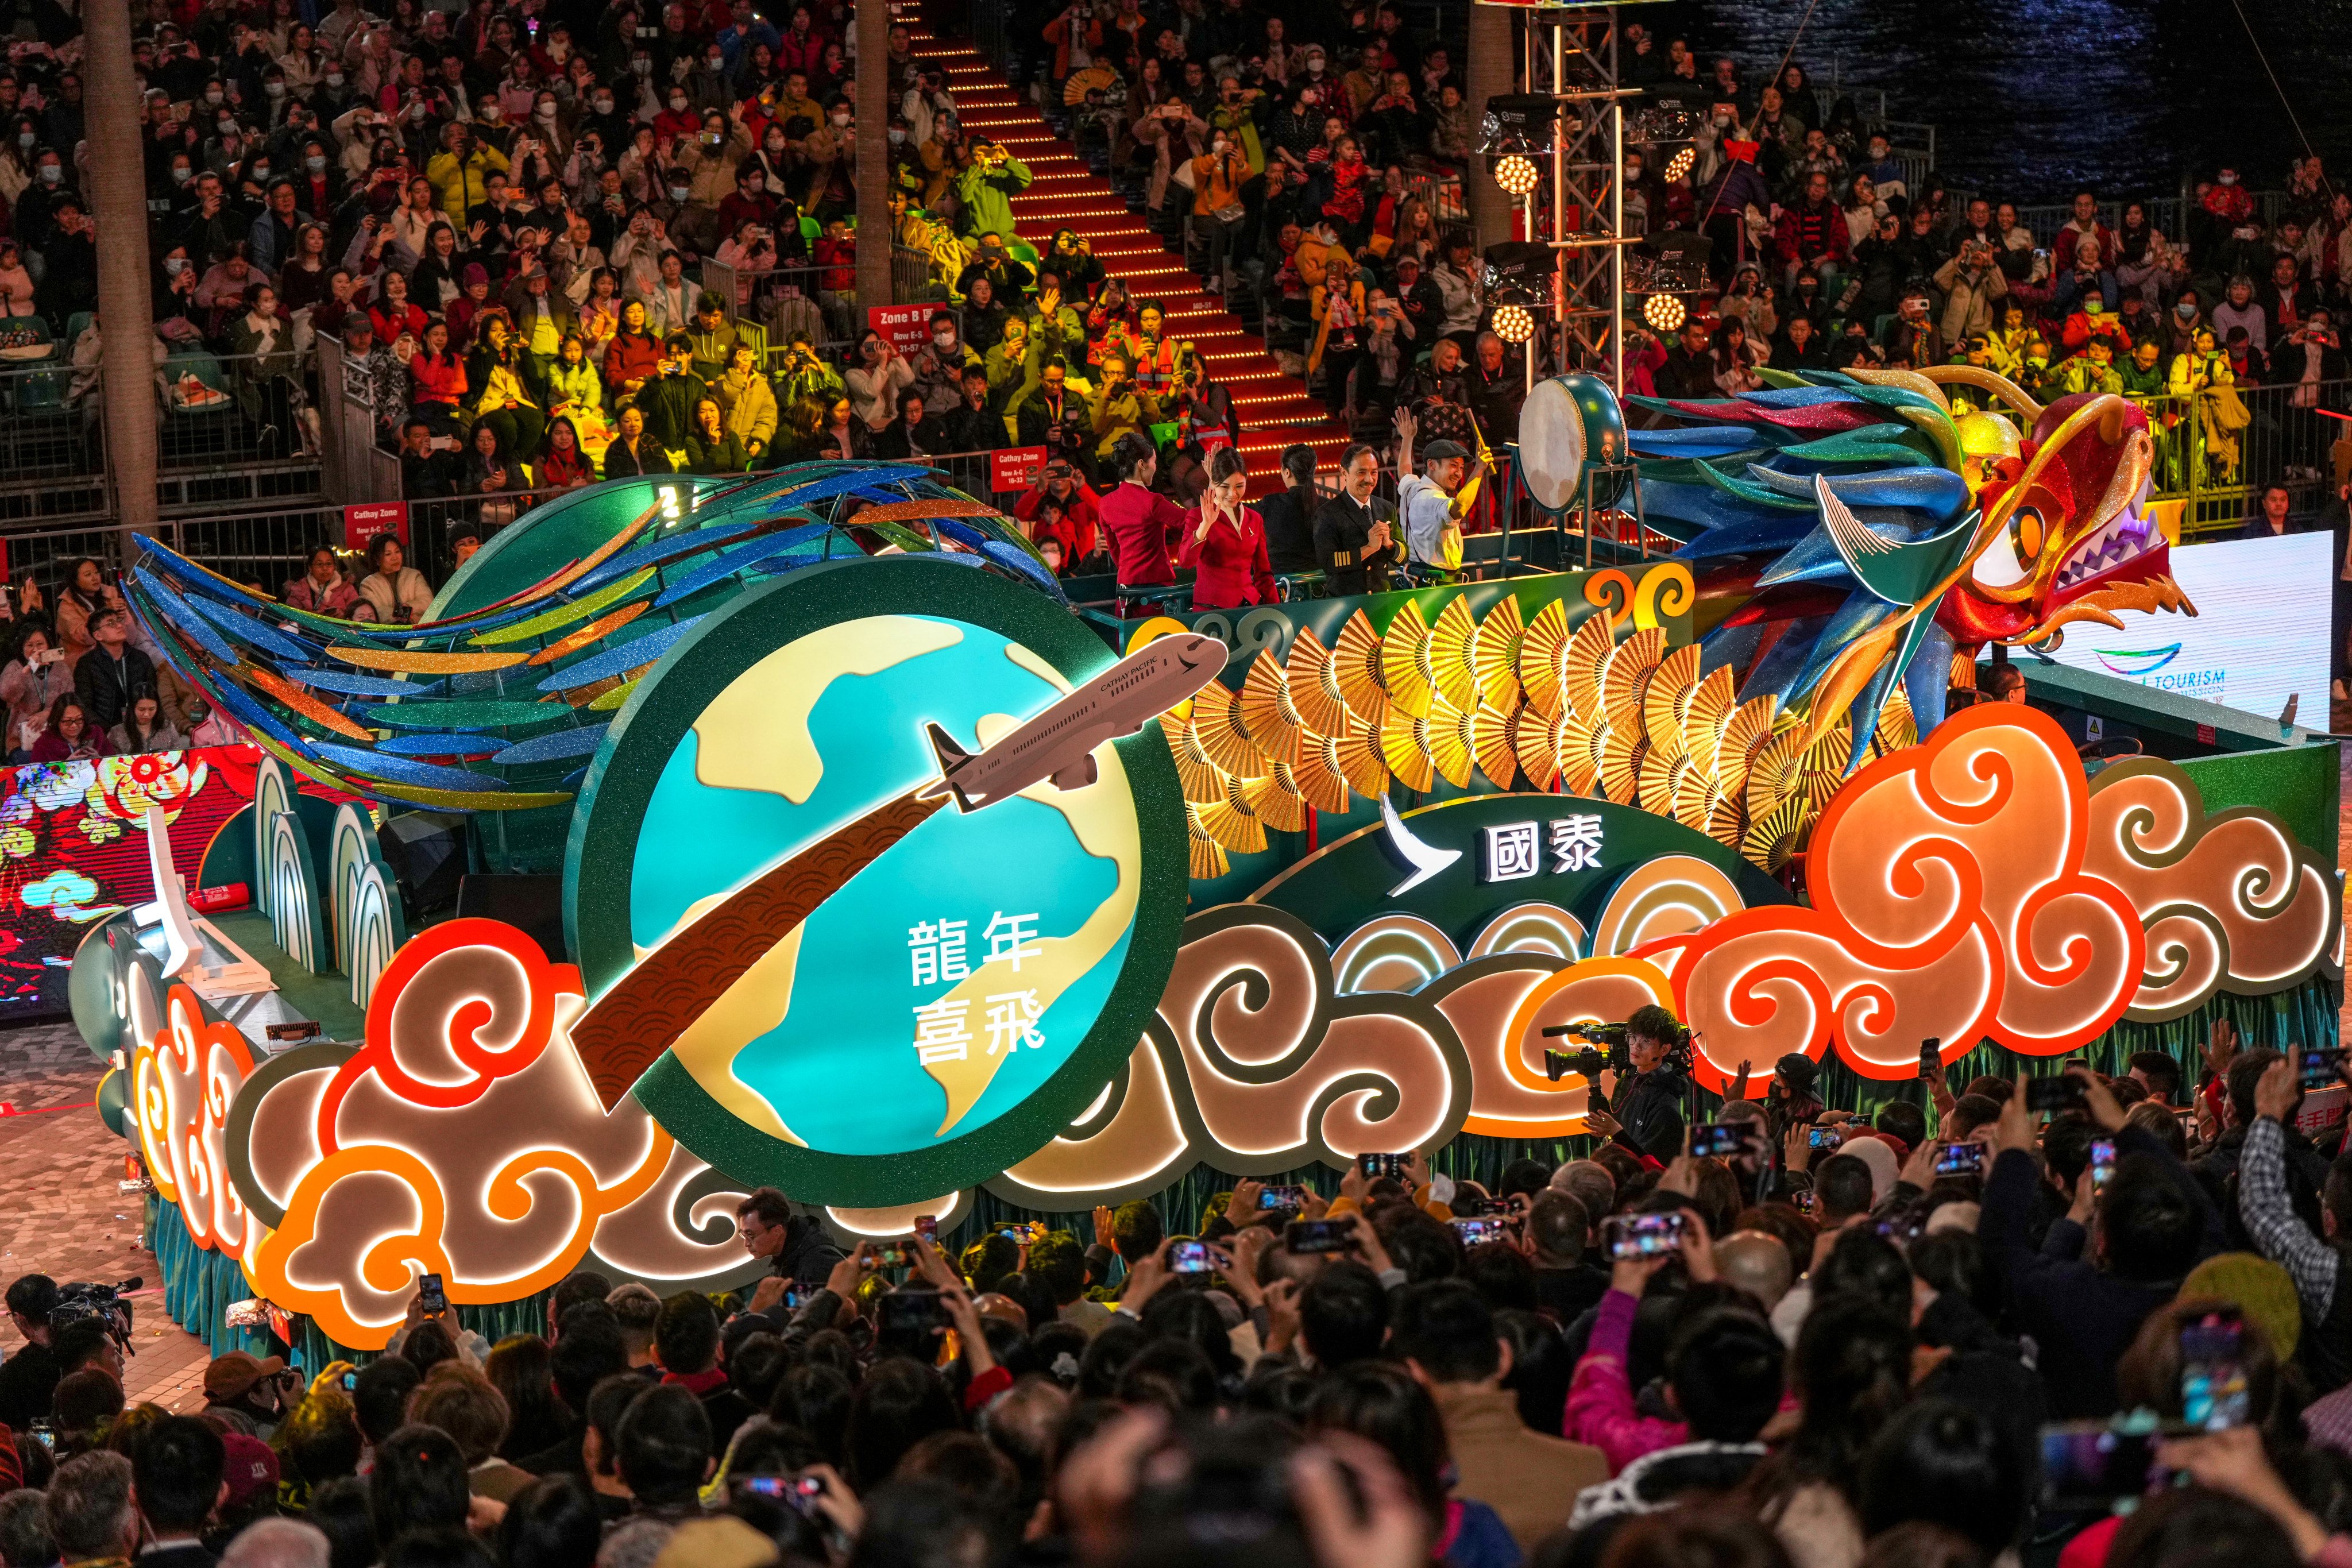 Cathay Pacific’s float led the parade. Photo: Eugene Lee